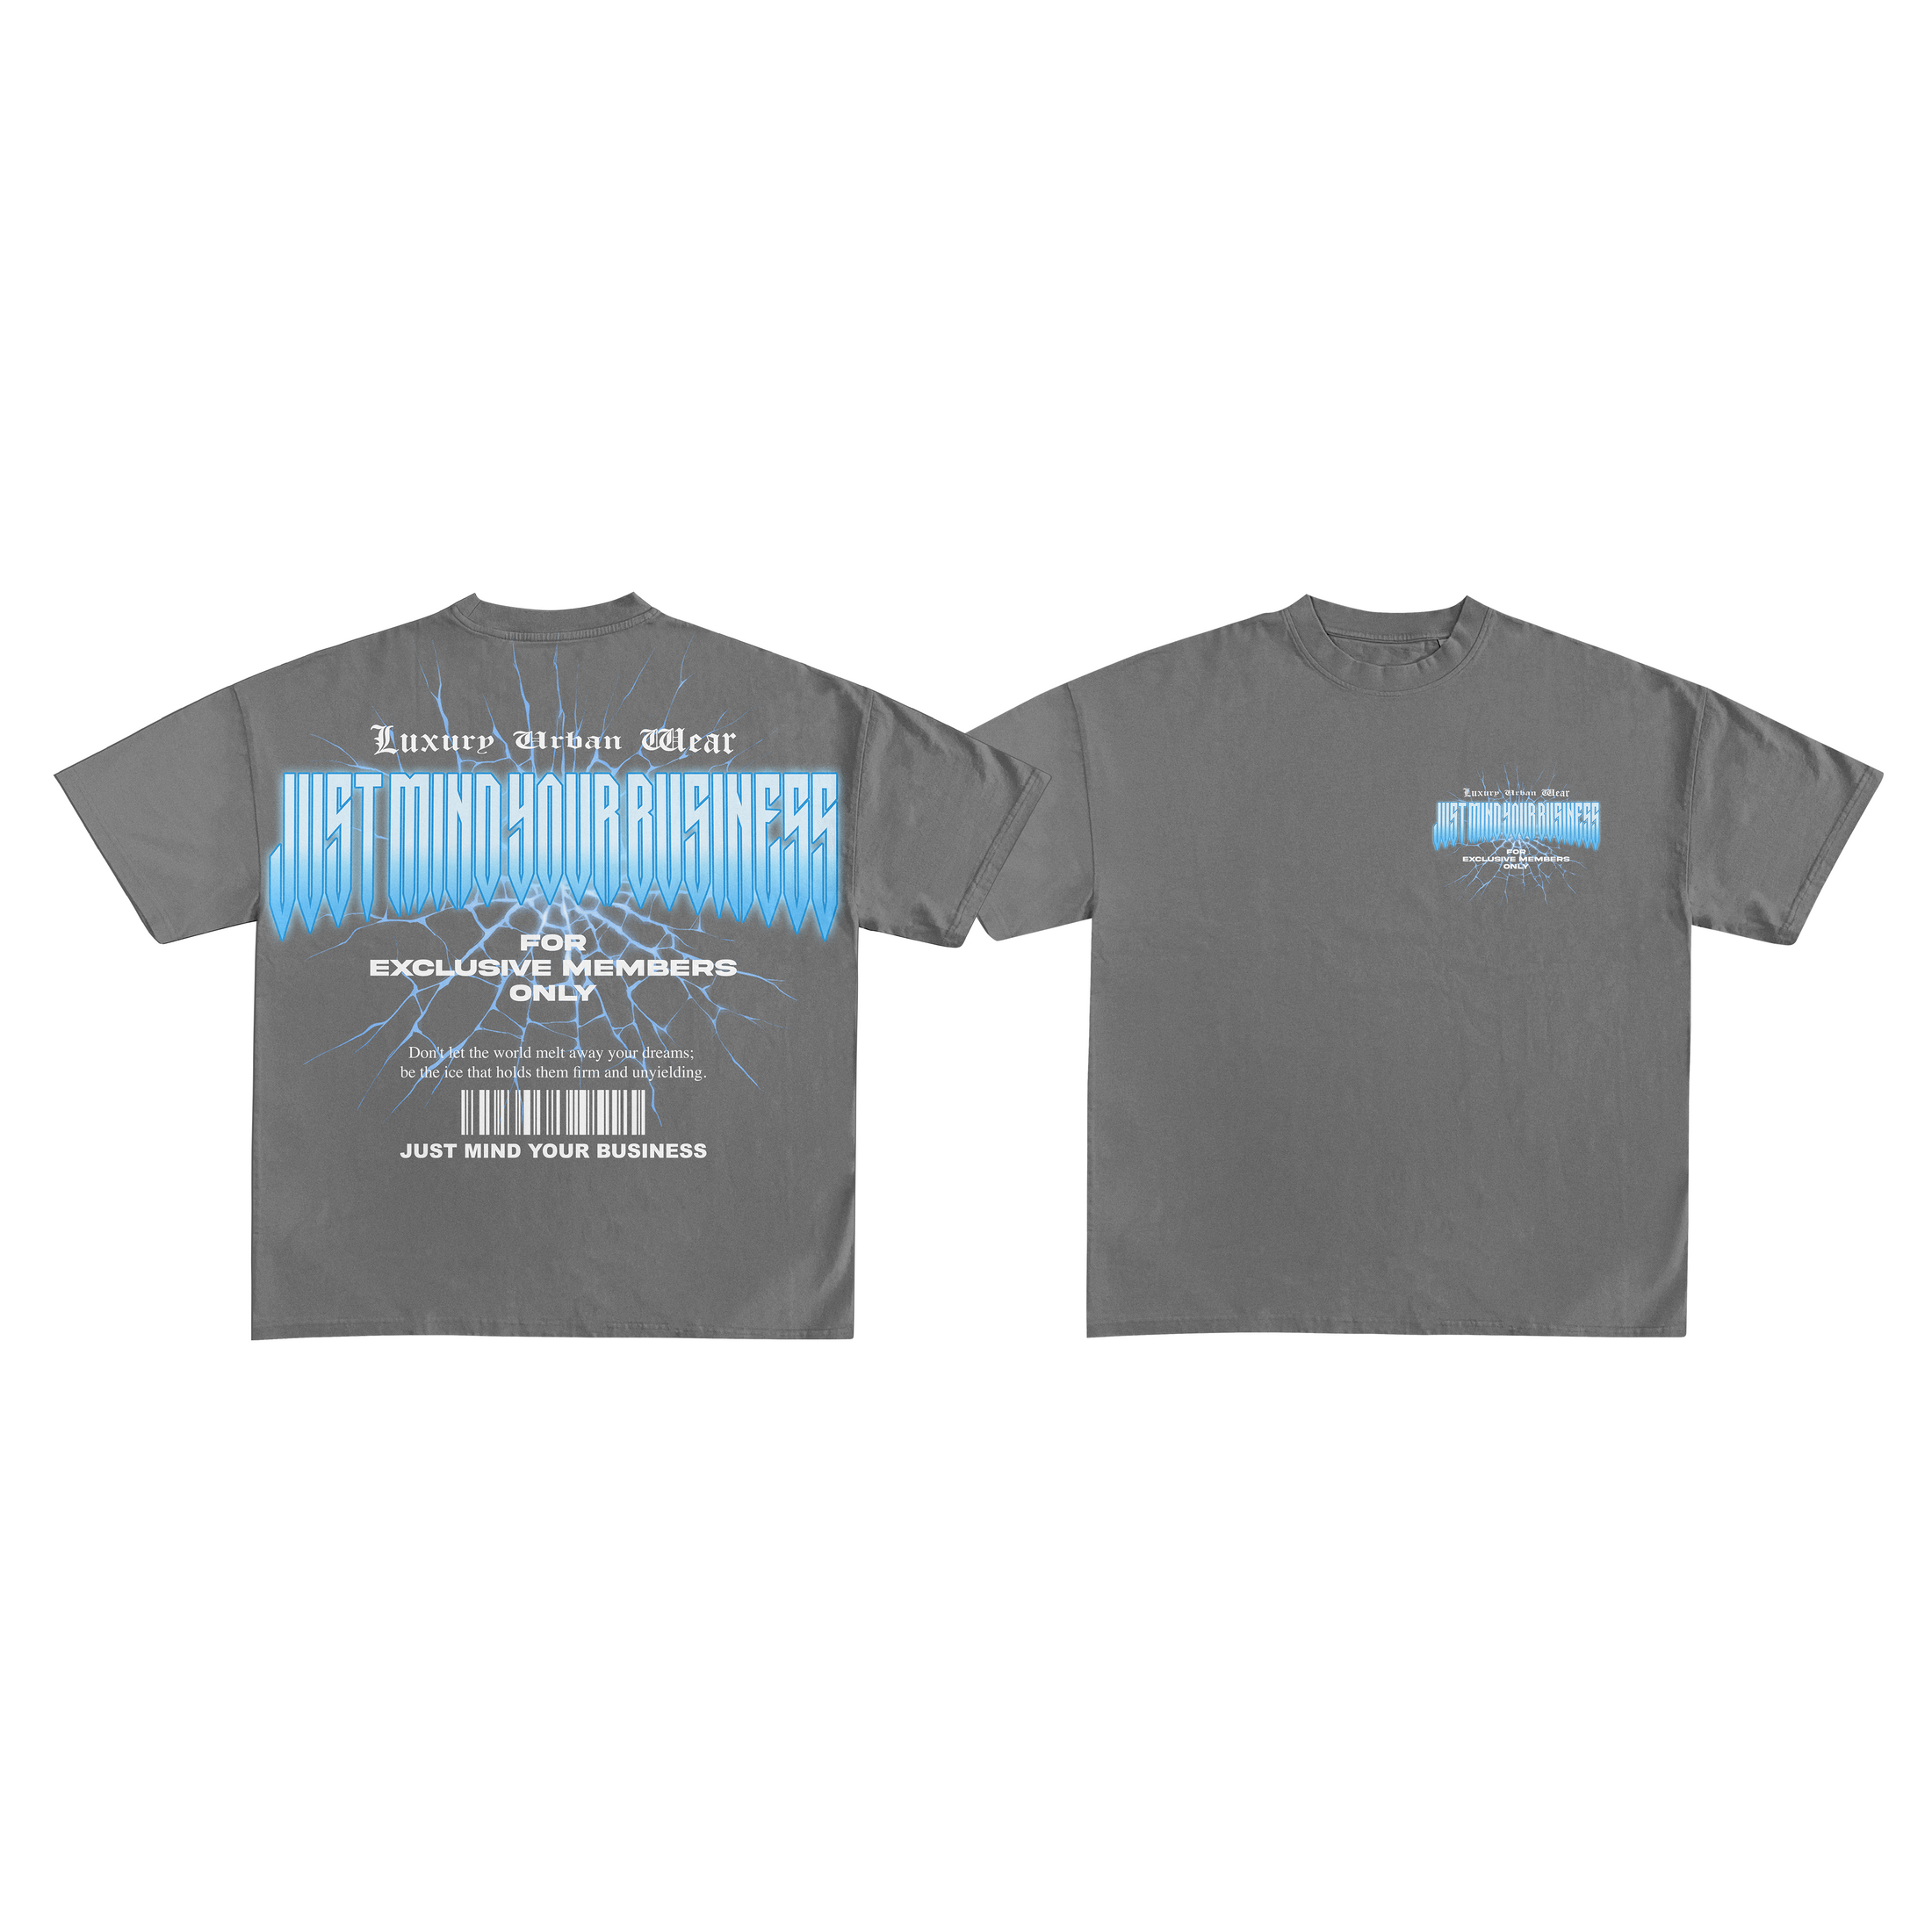 Member only Tee (ash wash grey)